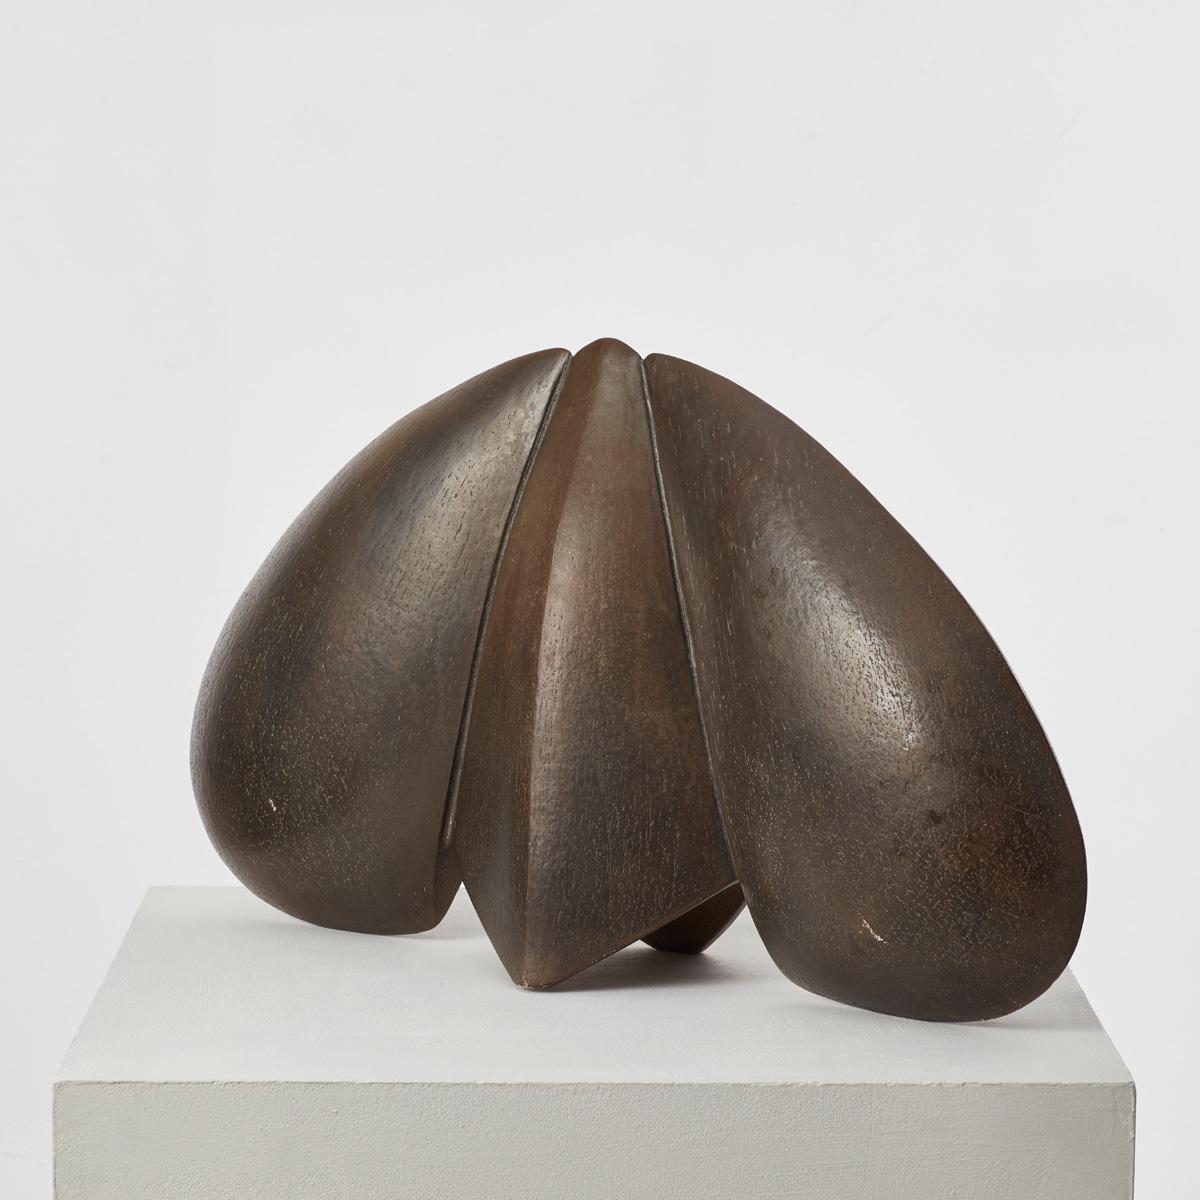 A large, stoneware abstract sculpture with a tripartite composition comprising biomorphic shapes. It was previously owned by Sir Terence Conran (1931 - 2020). Conran, an inimitable design pioneer and businessman,“ did more than anyone to enhance